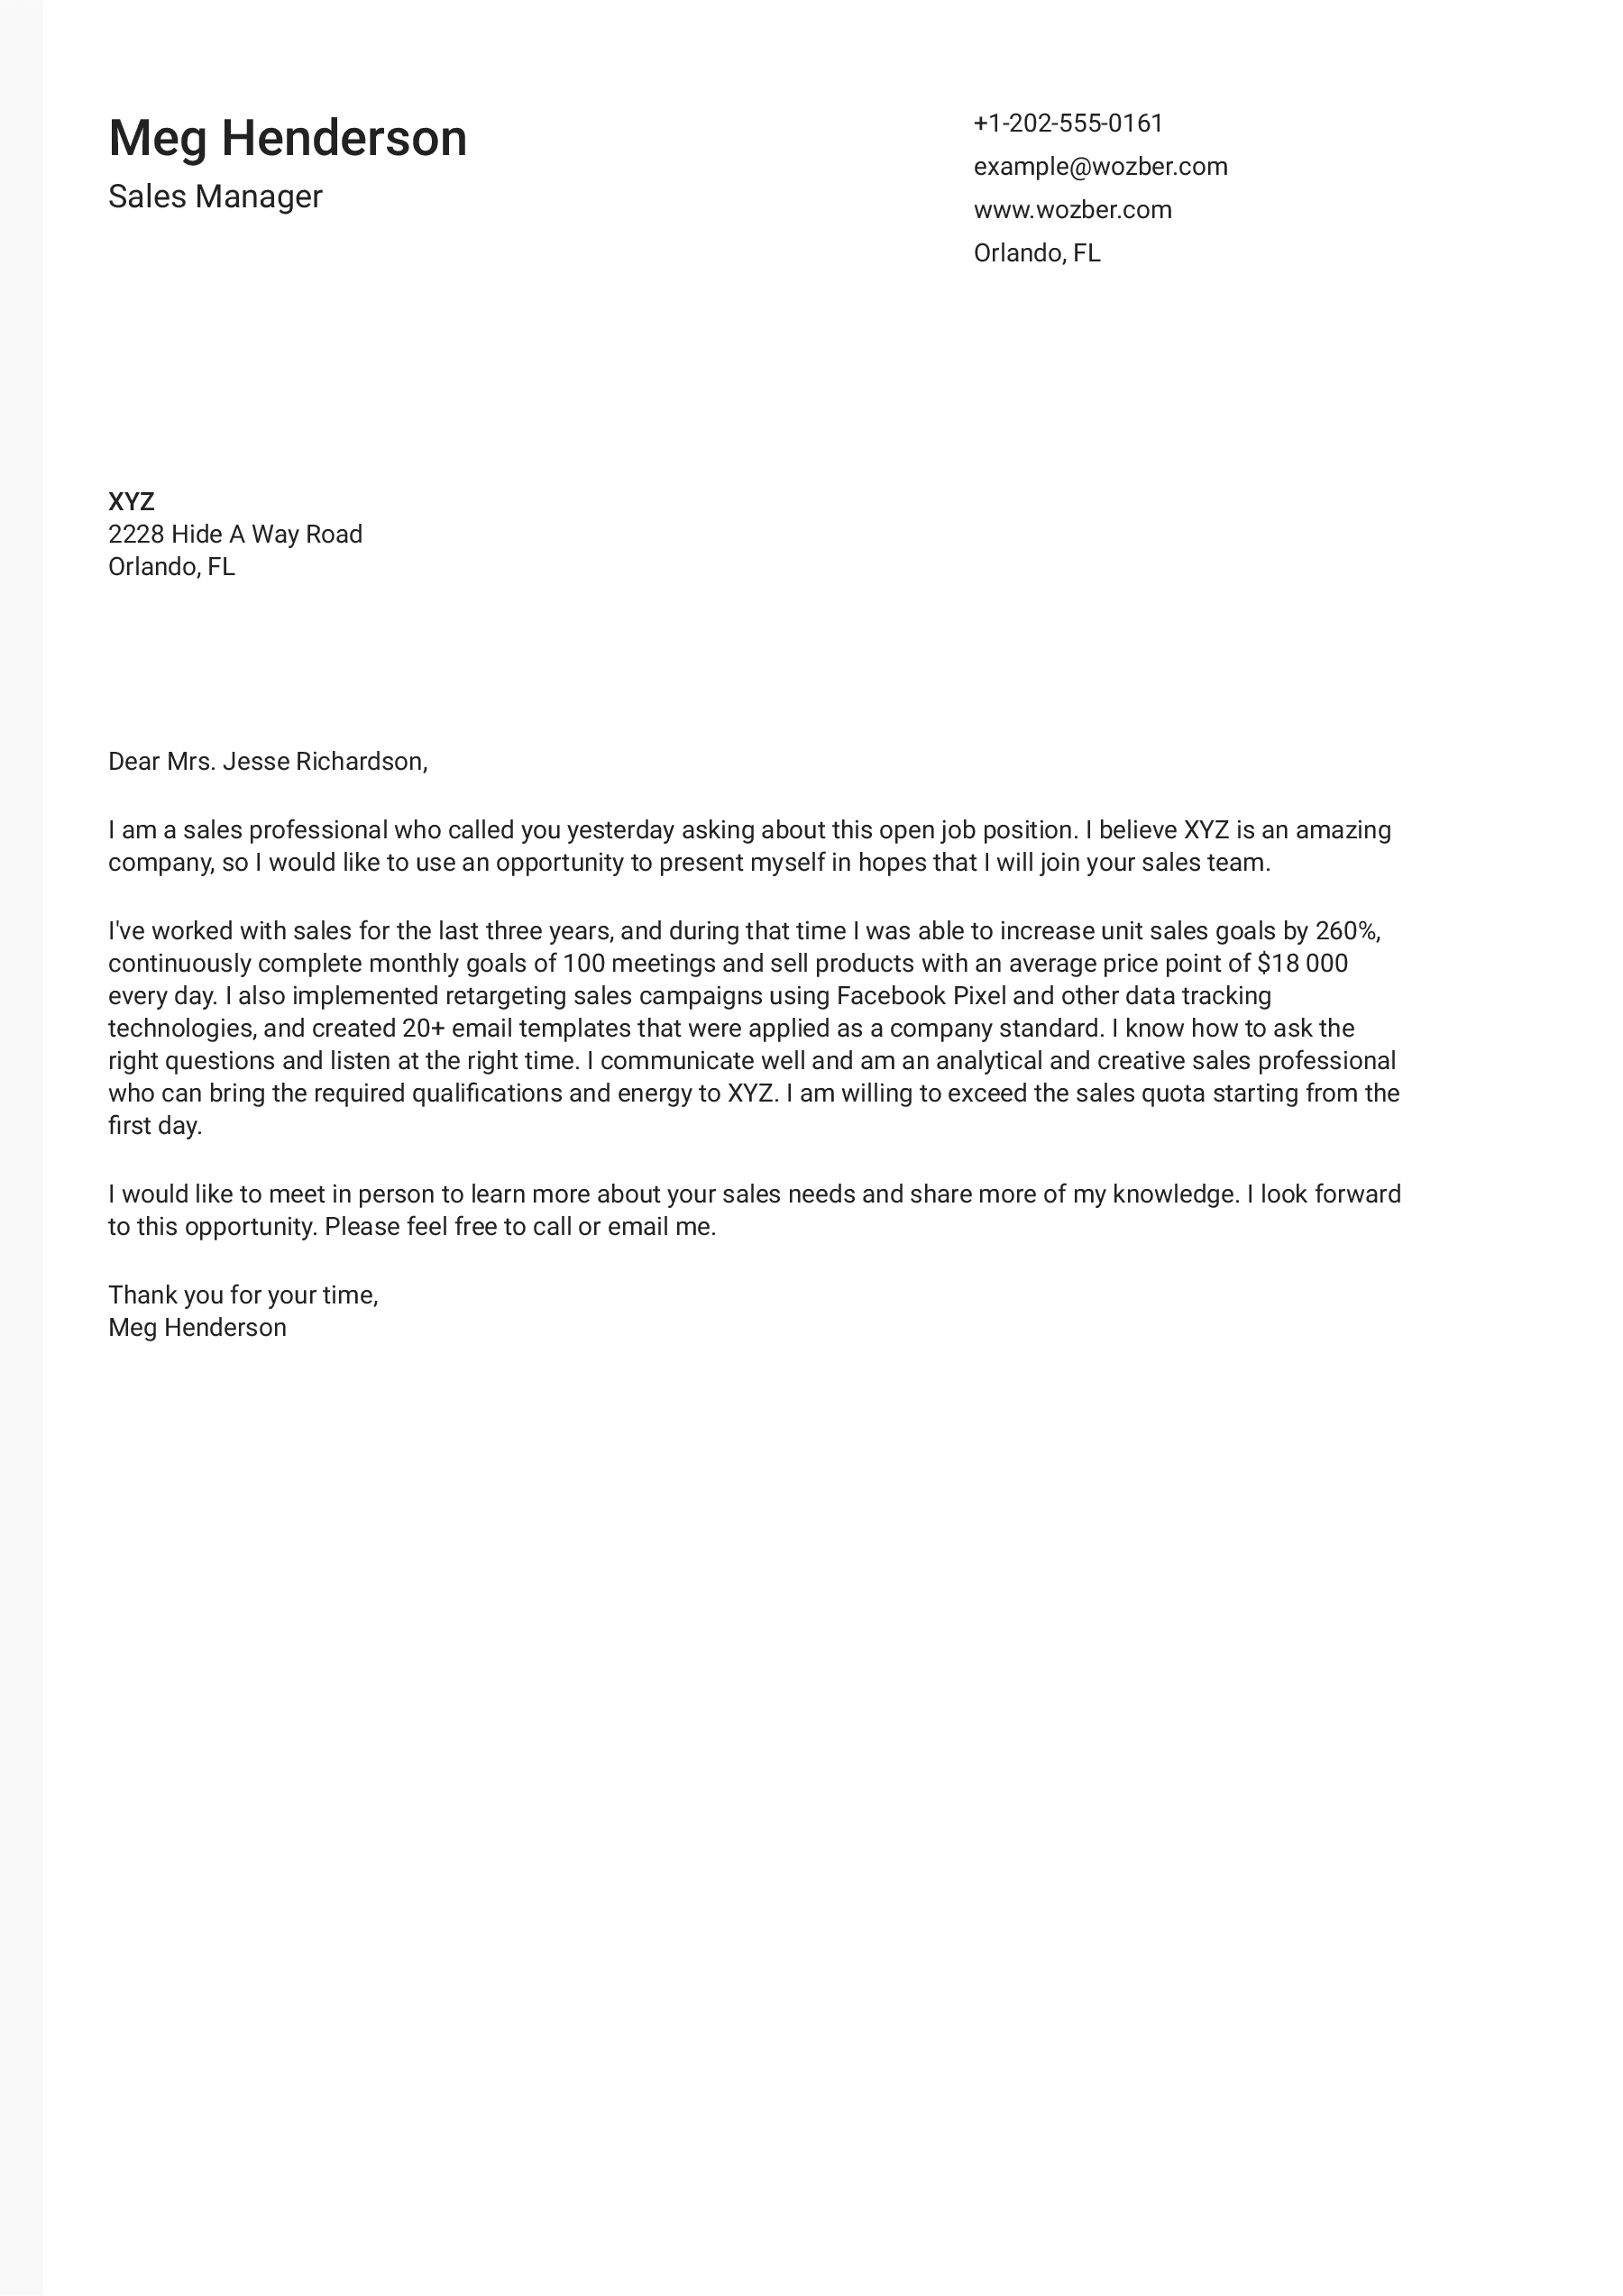 help with cover letters for job applications